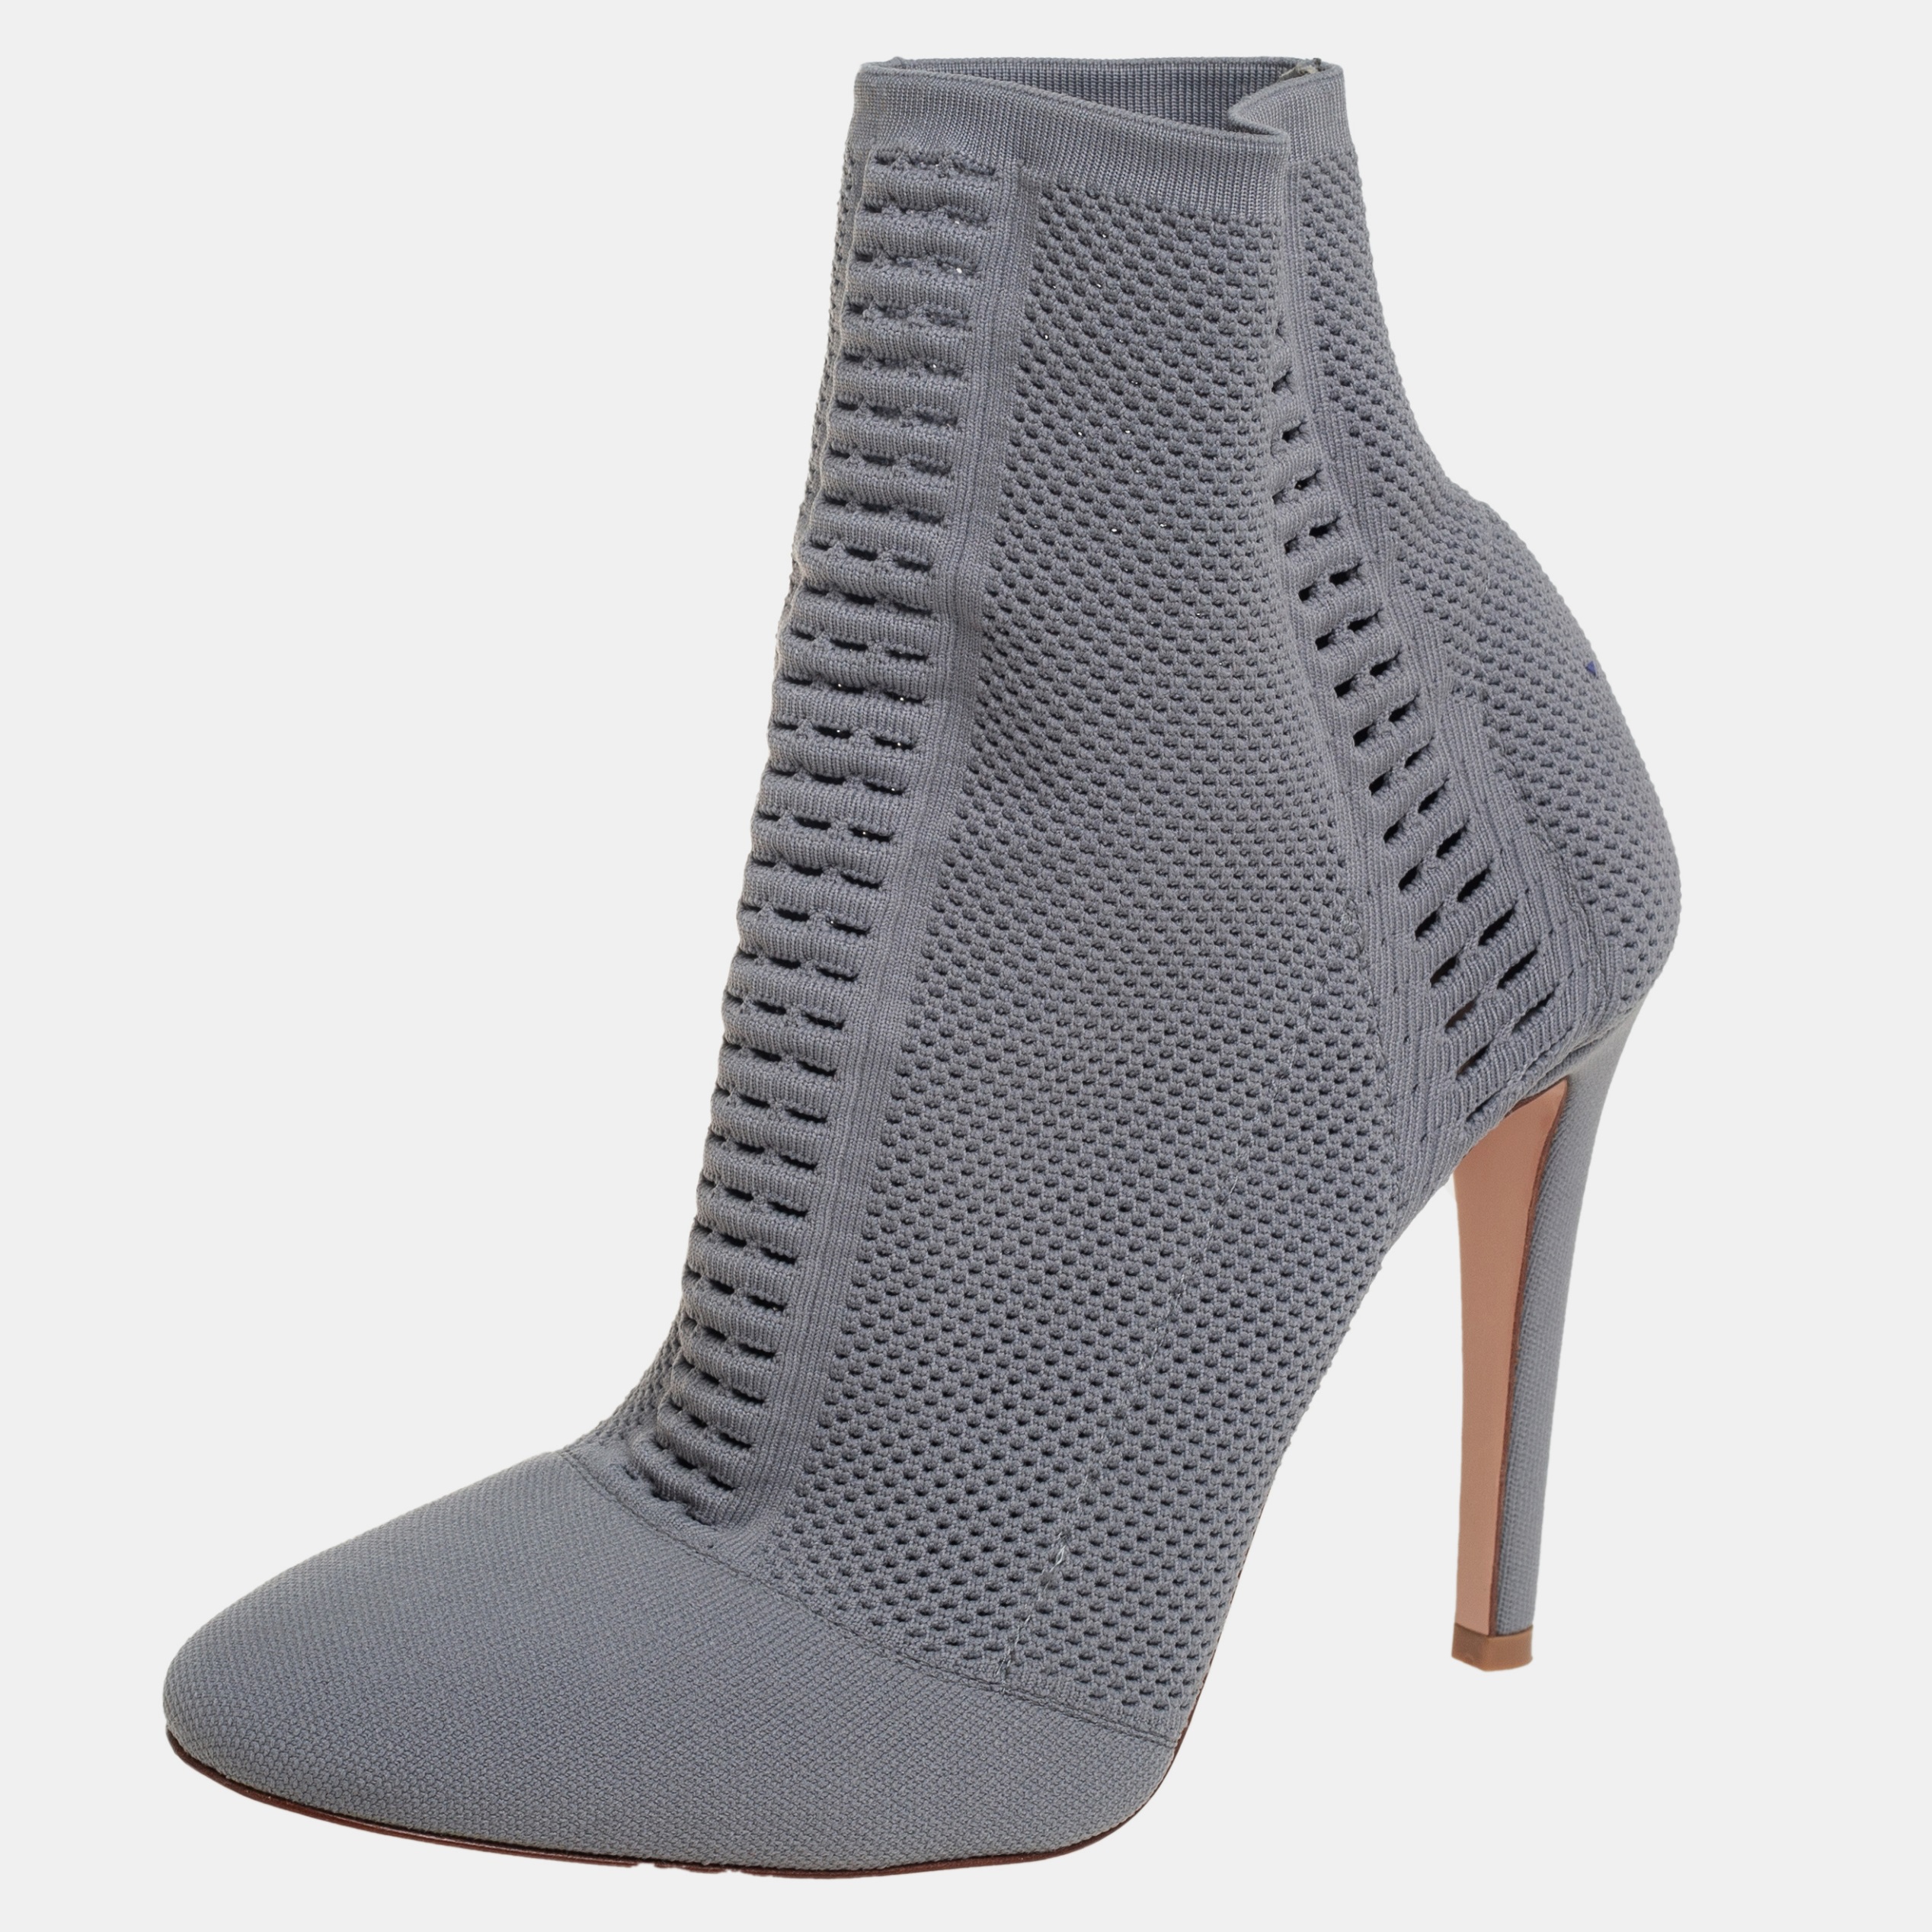 Pre-owned Gianvito Rossi Grey Stretch Knit Thurlow Ankle Boots Size 39